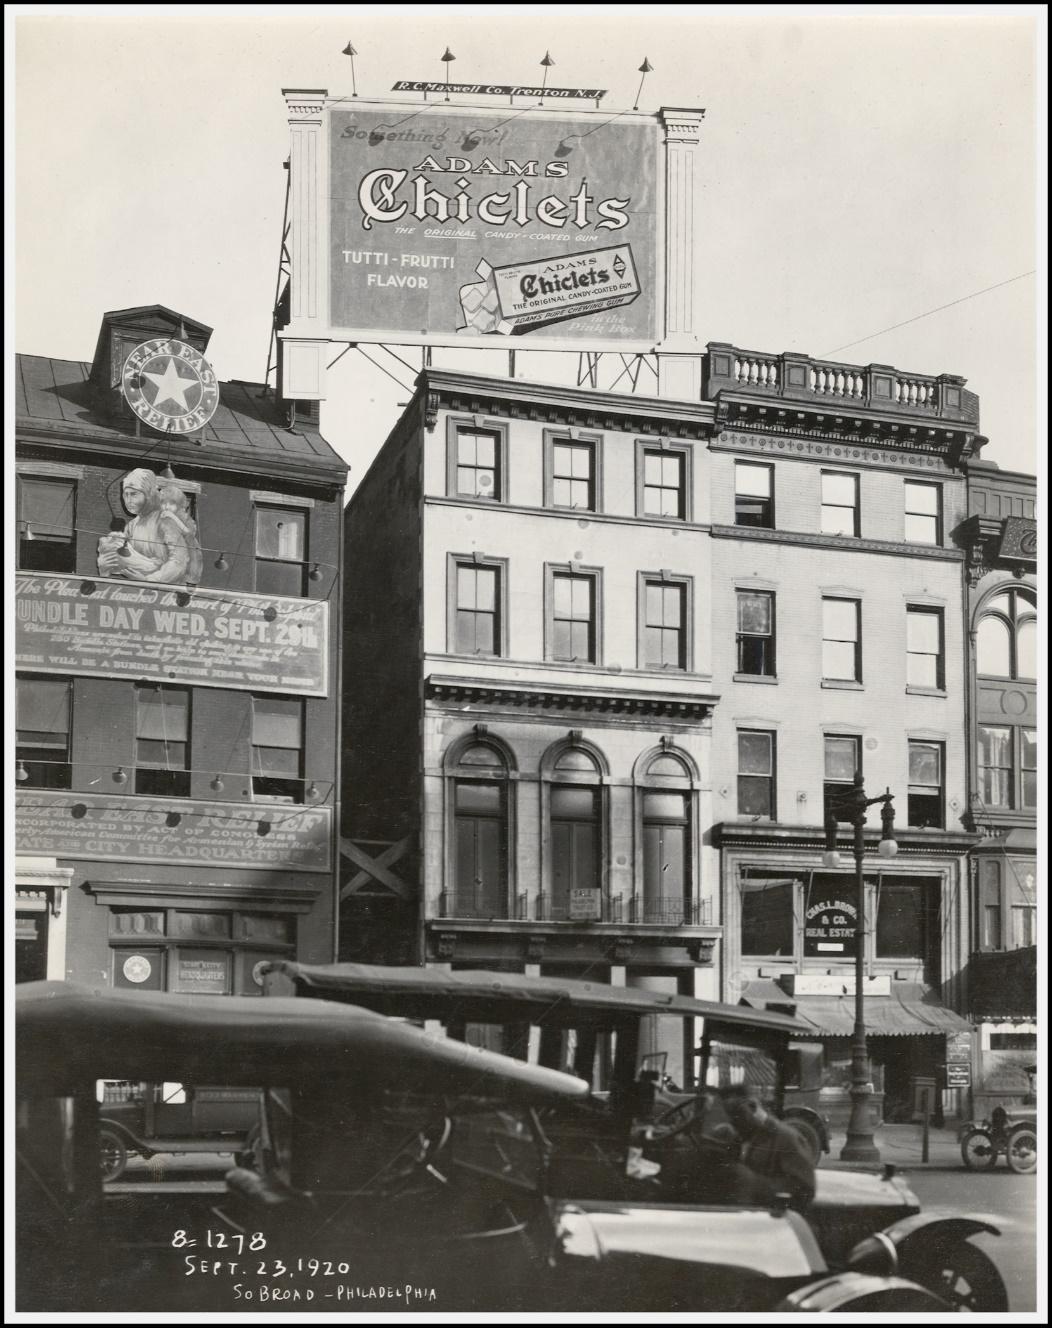 A black and white photo of a building with a sign on it

Description automatically generated with low confidence